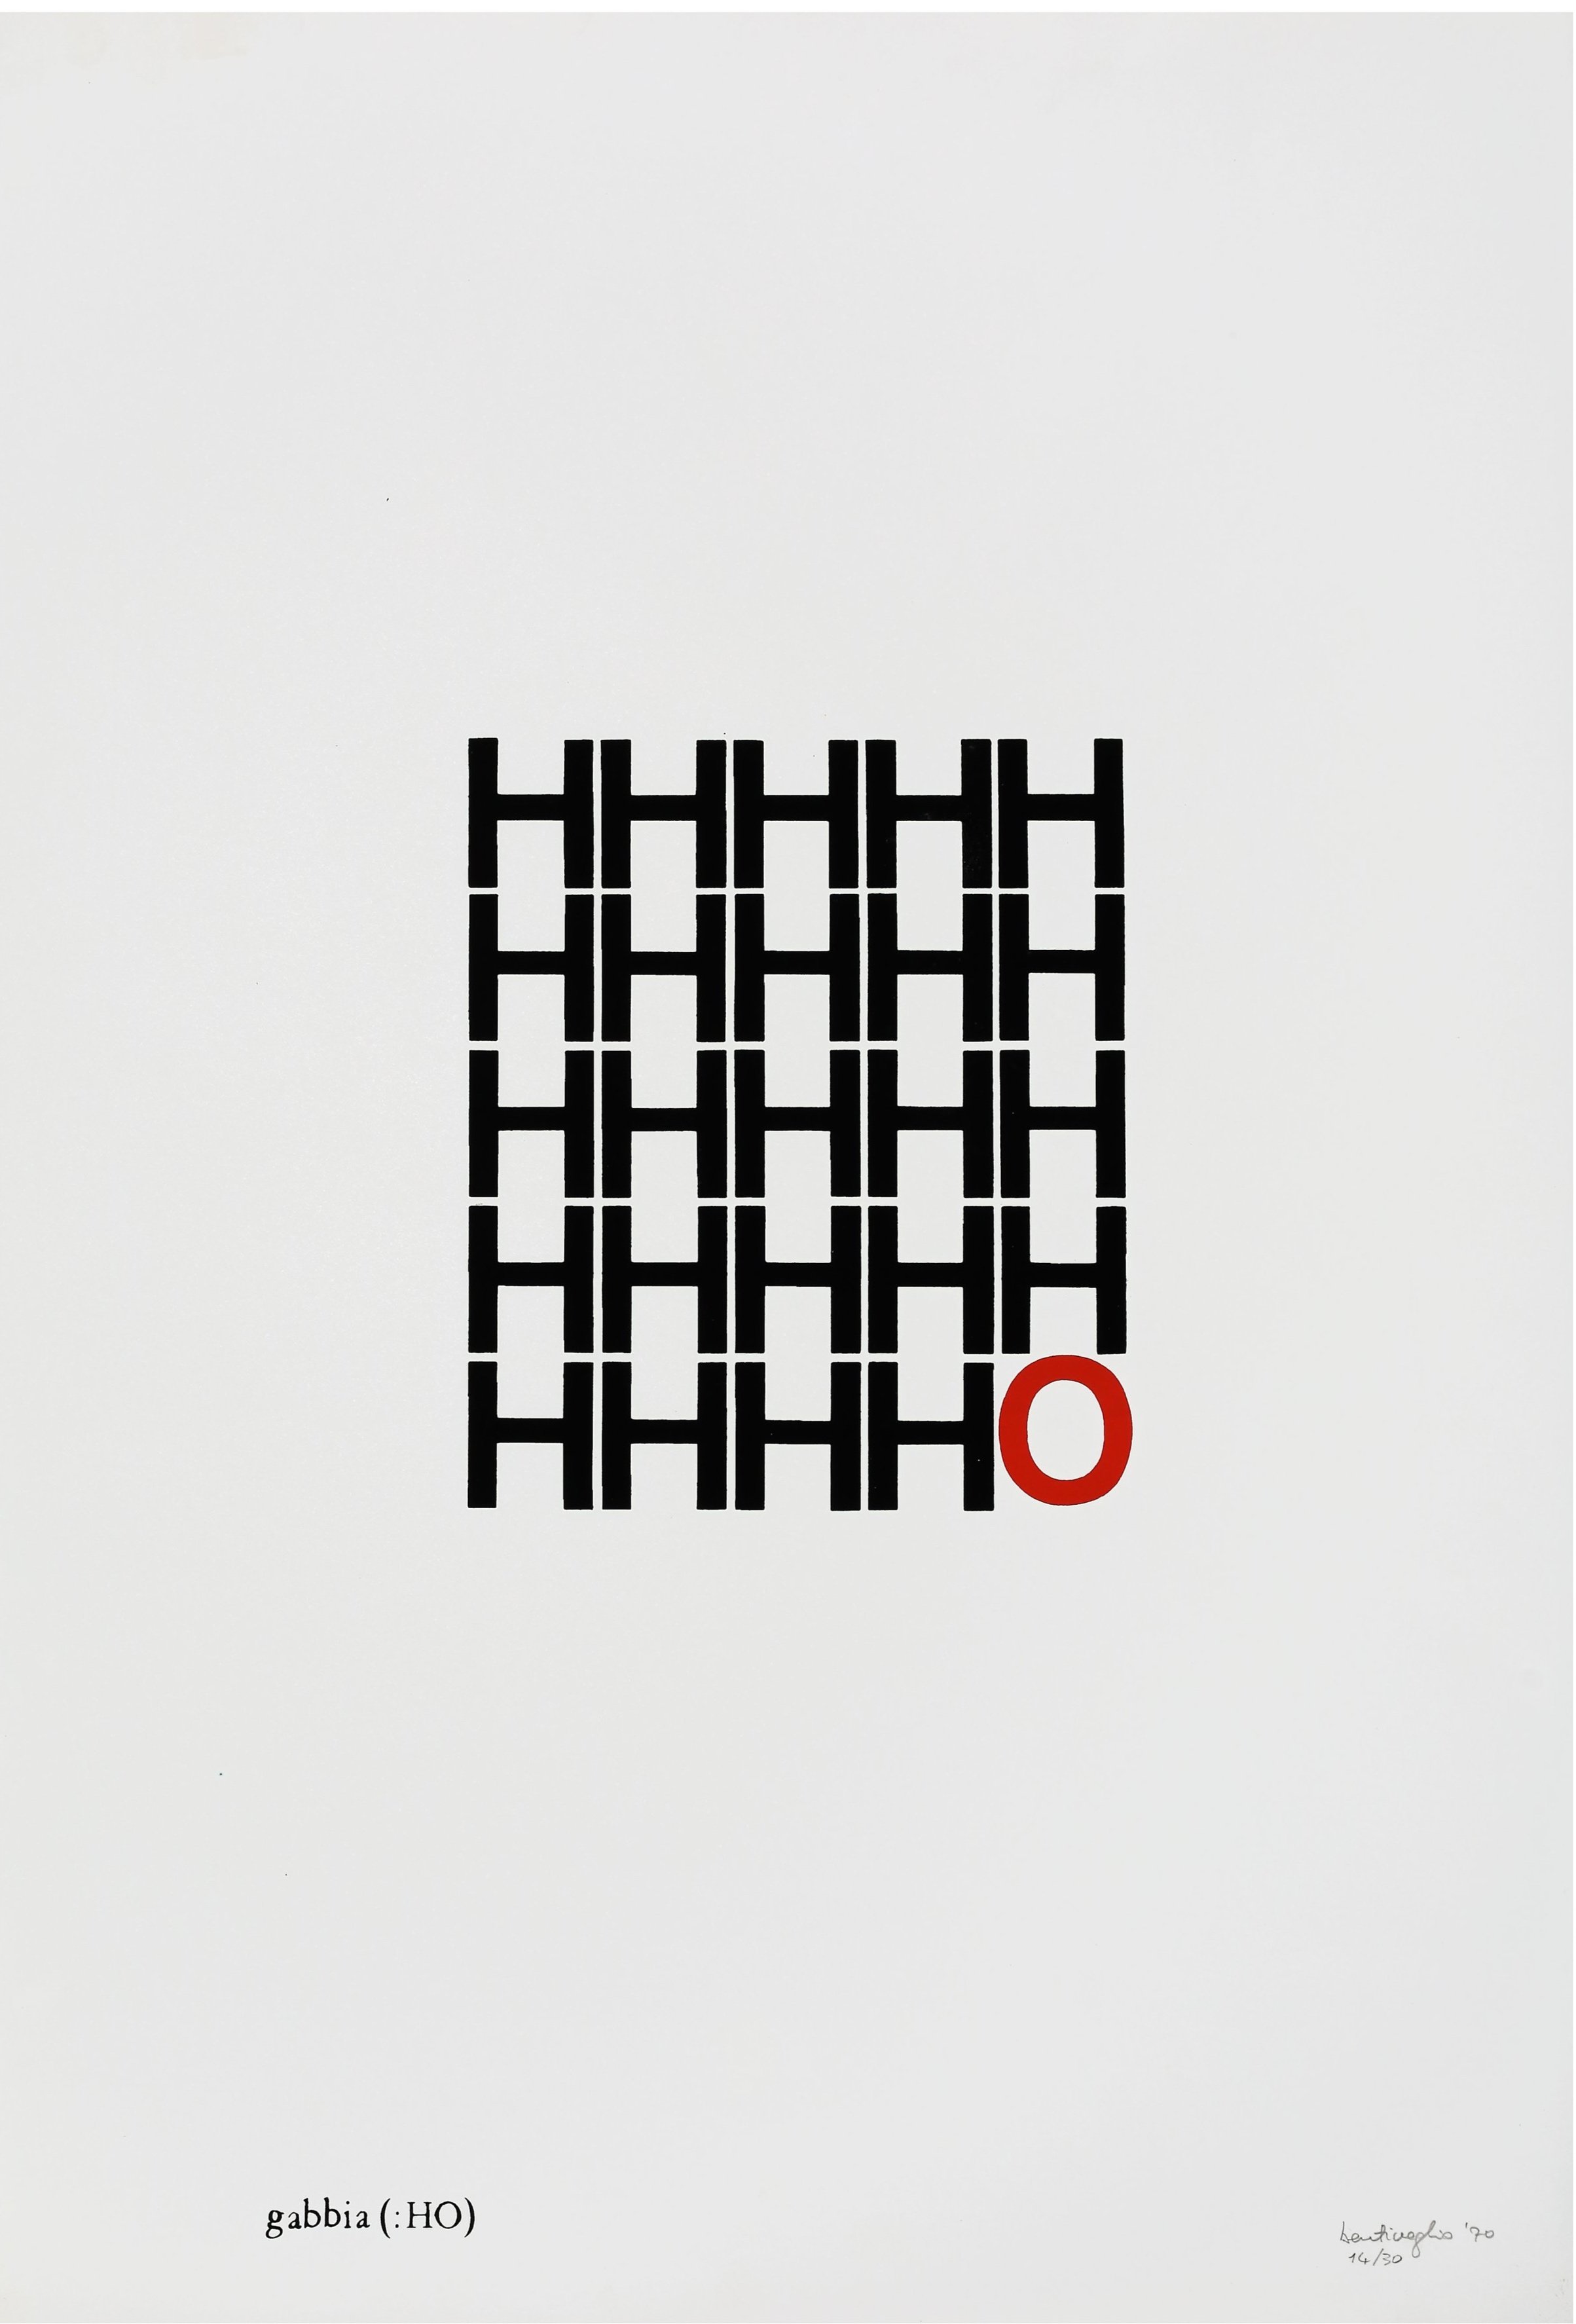 Cage (I have), 1966
serigraph on paper